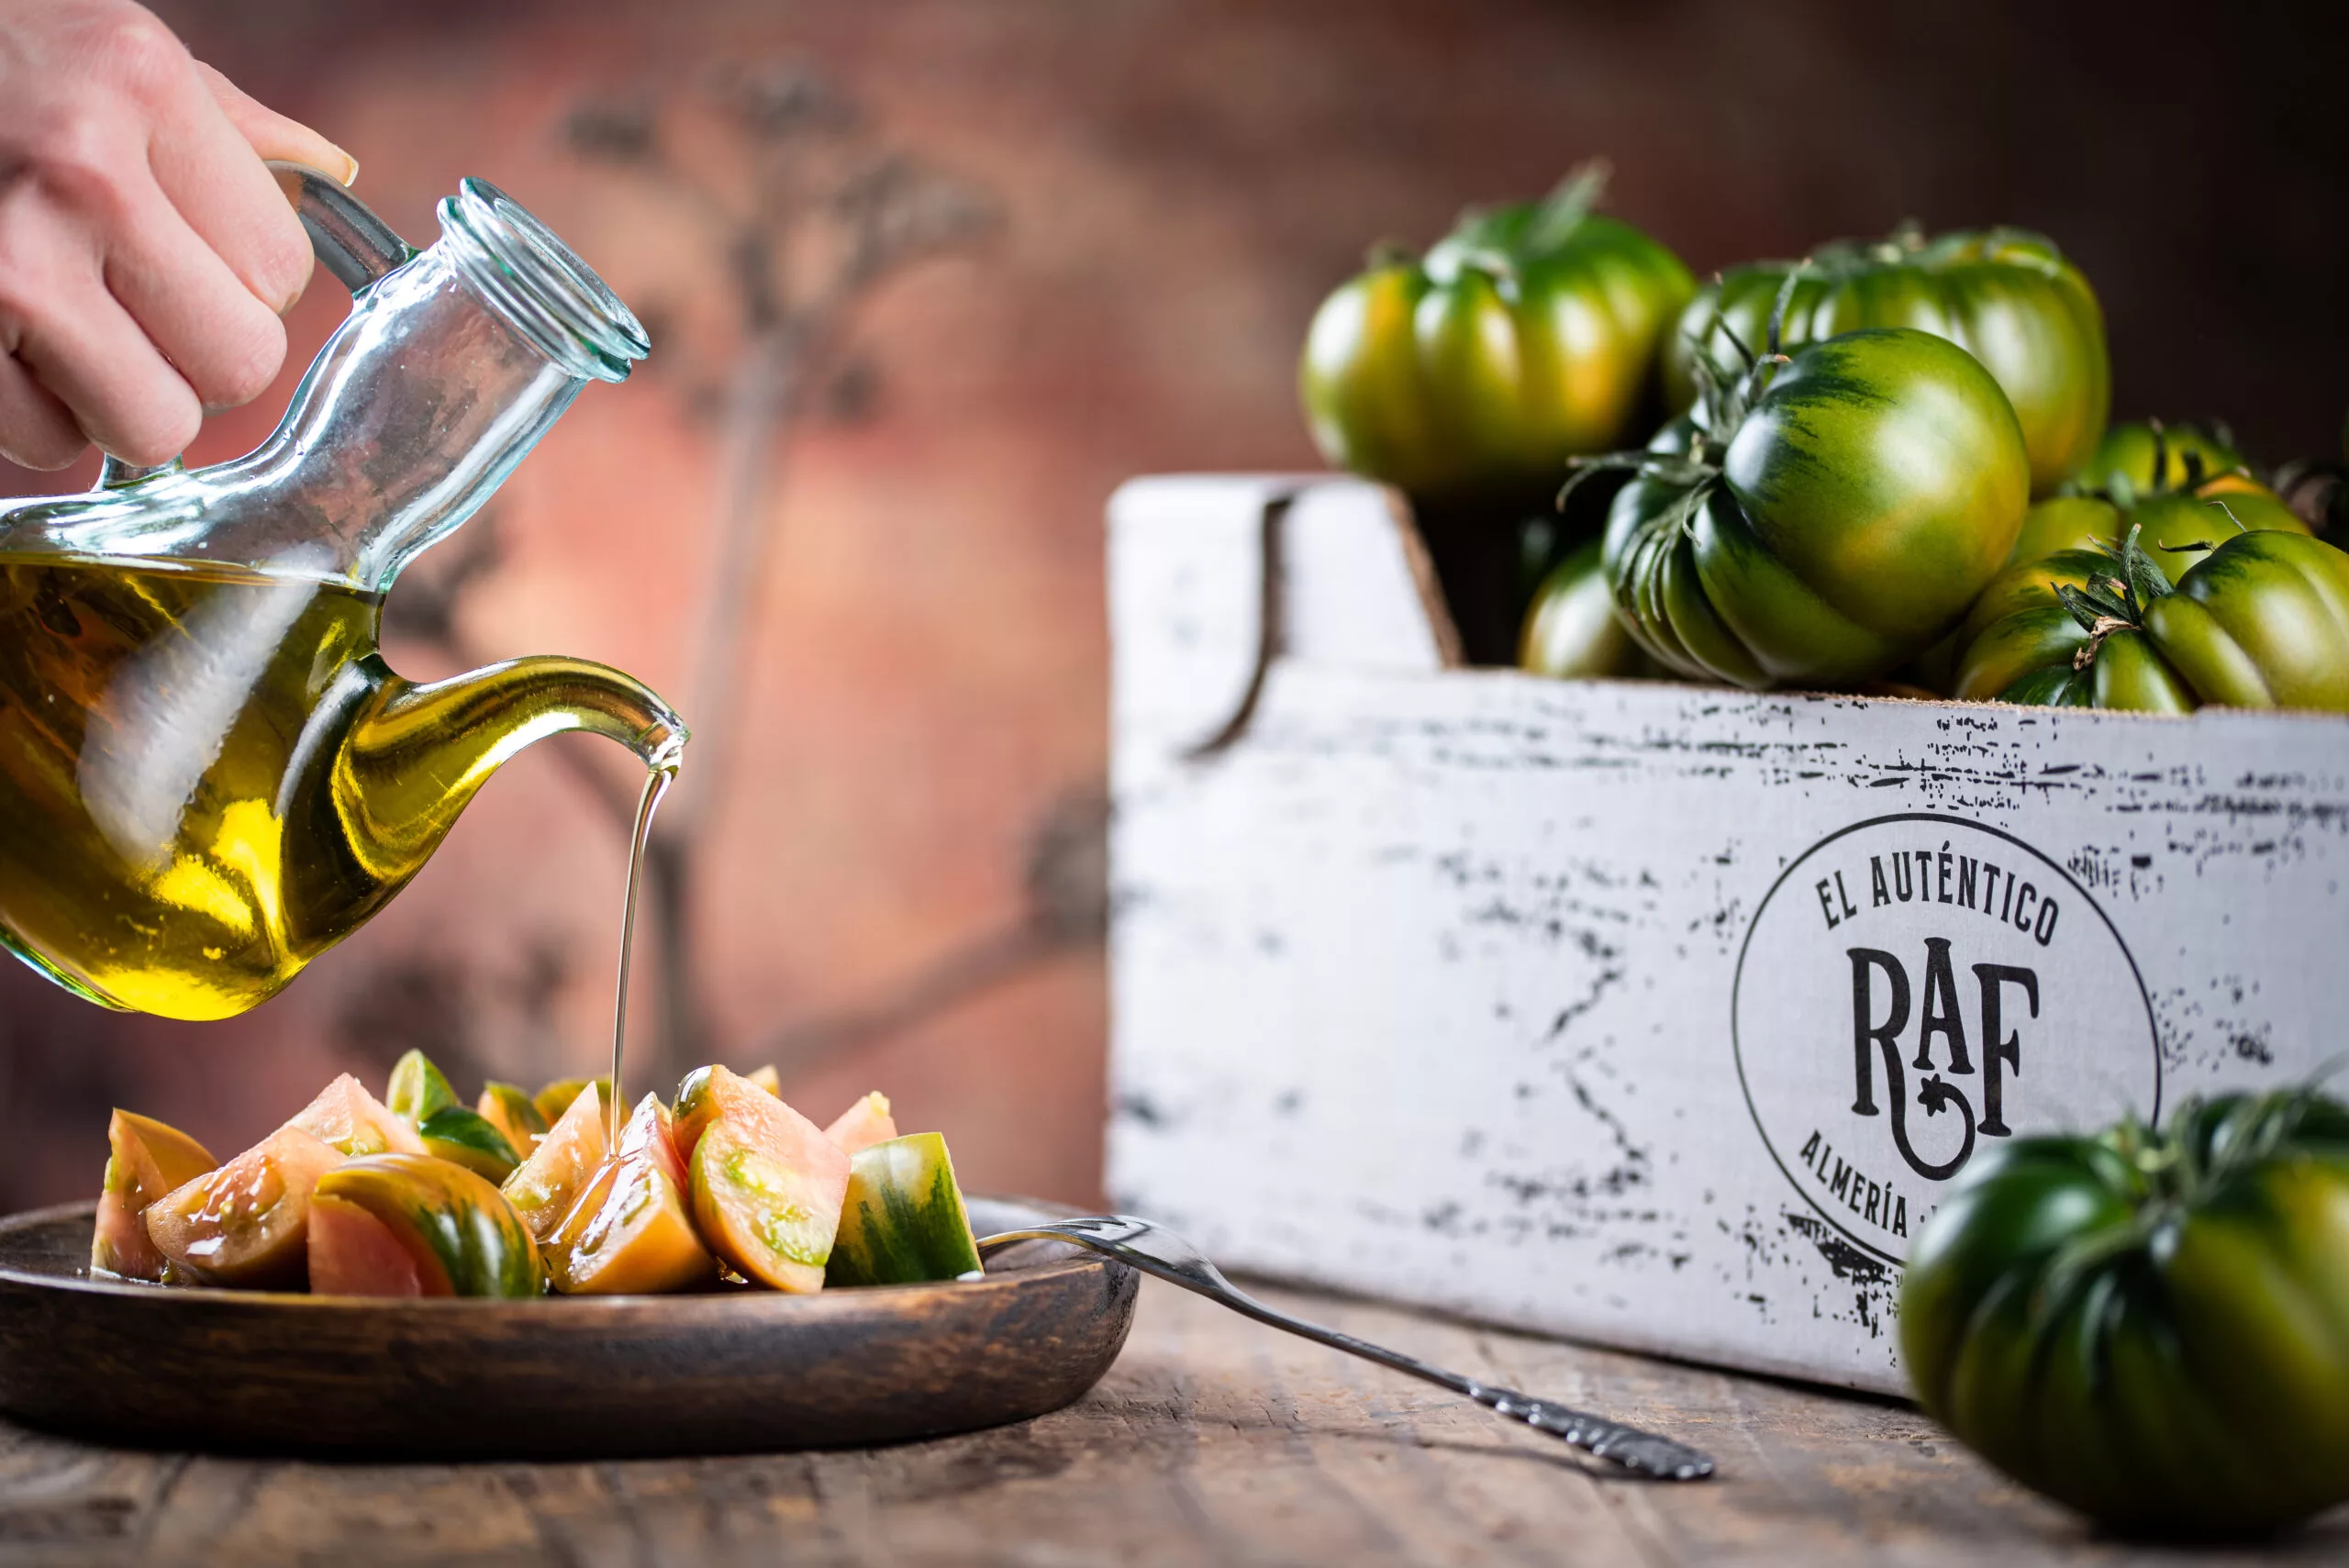 Our pedigree product, the Raf tomato.